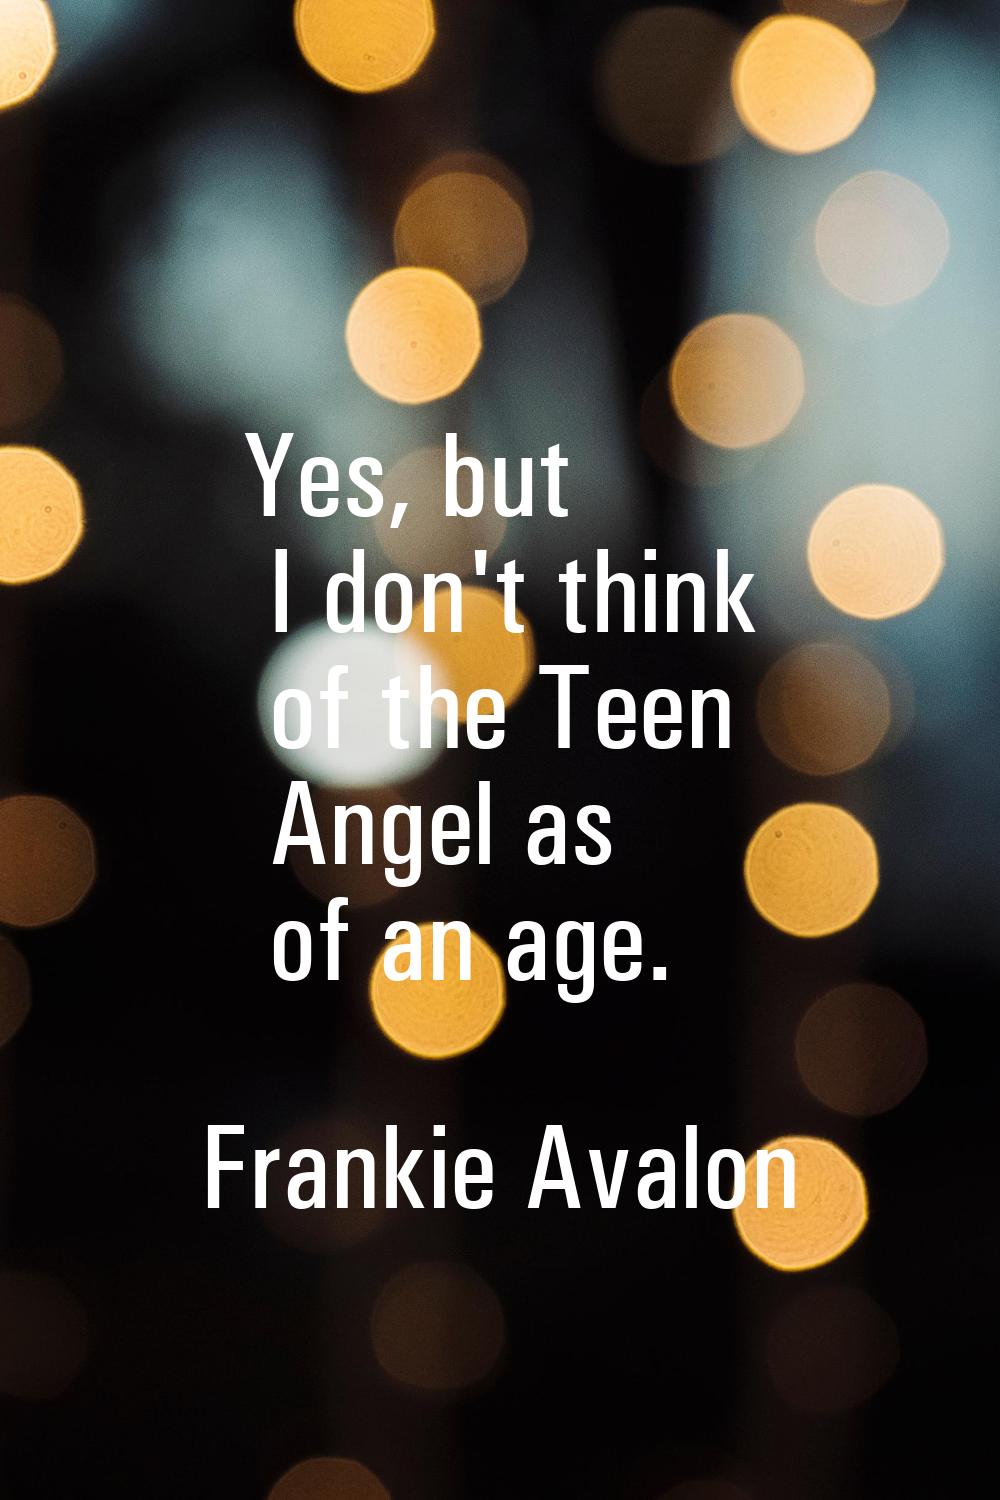 Yes, but I don't think of the Teen Angel as of an age.